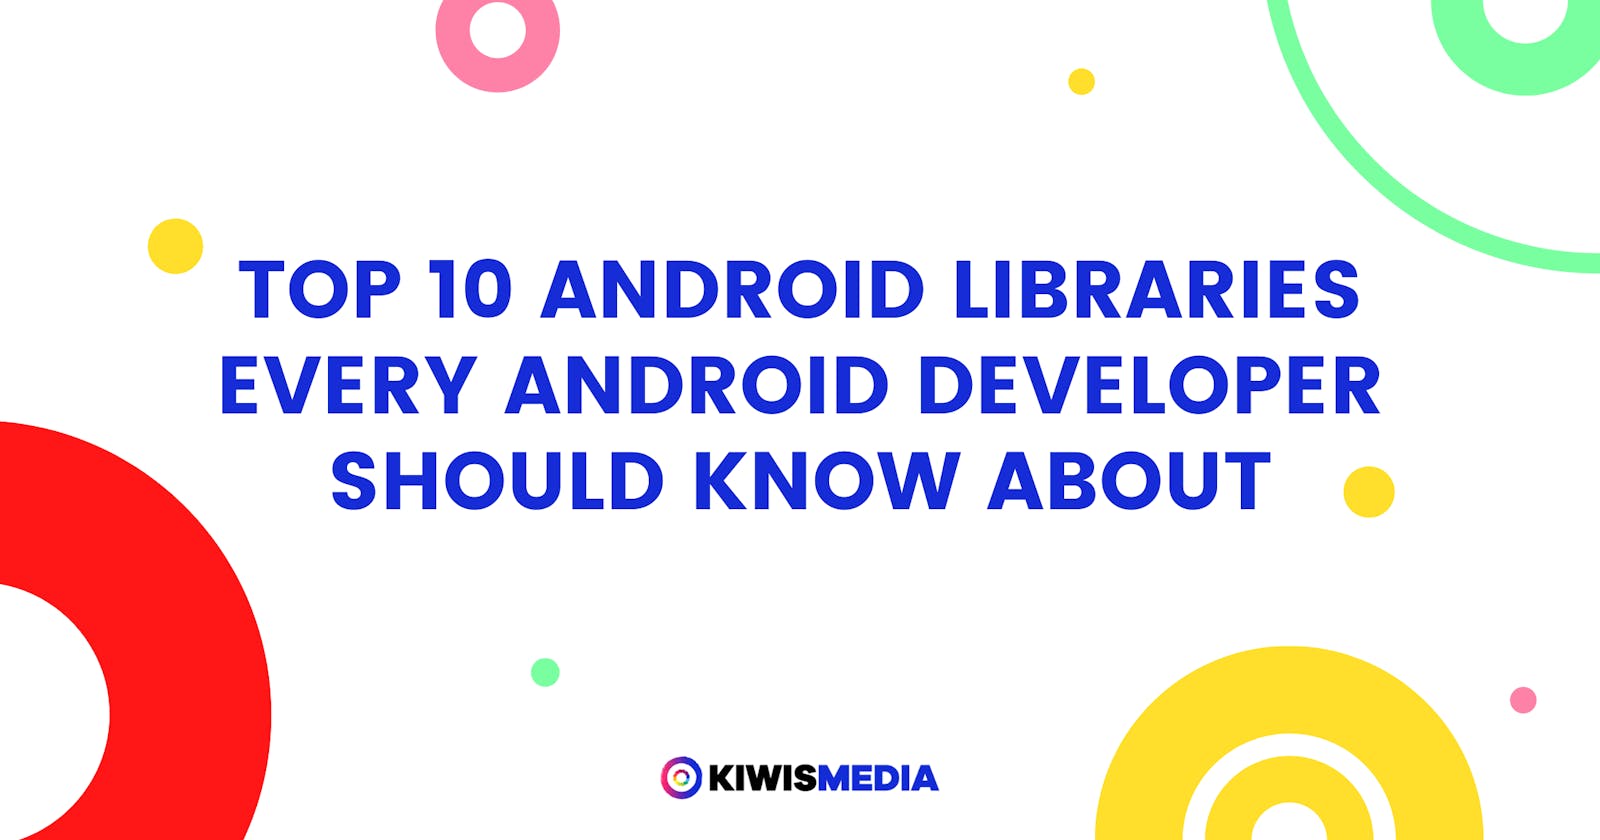 Top 10 Android libraries every Android developer should know about